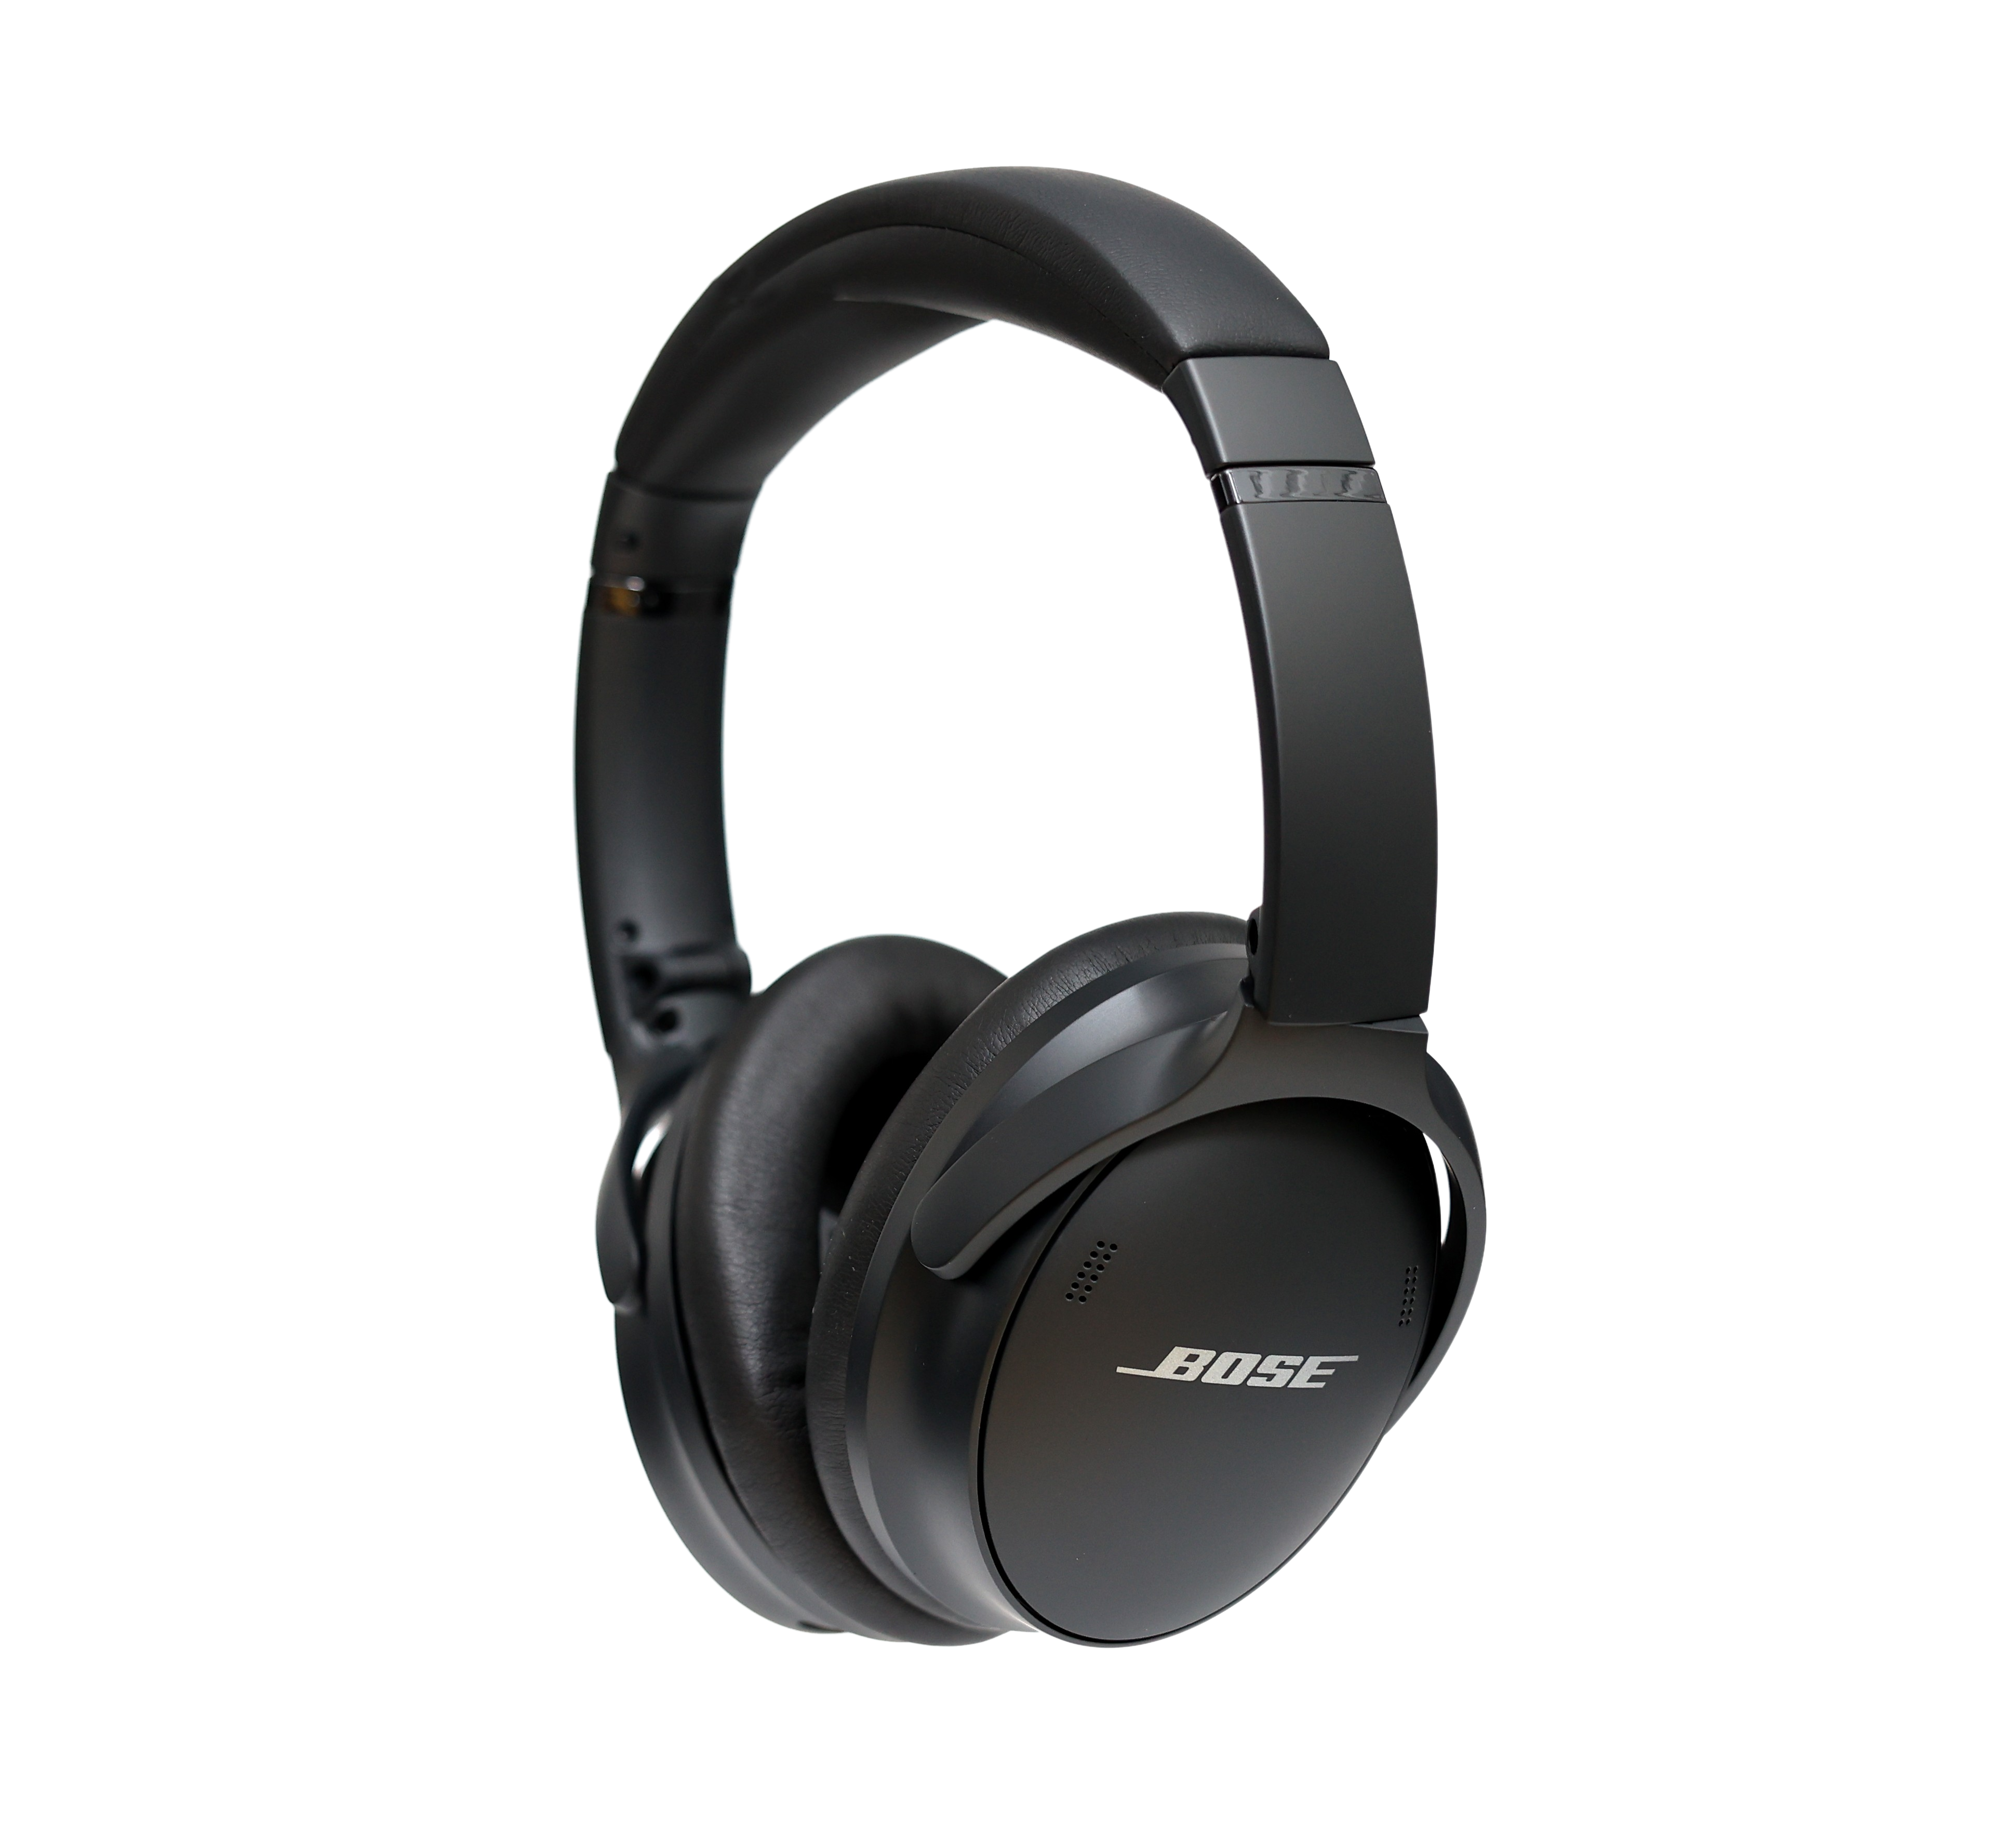 Marco Polo Dum inflation Rent Bose Quietcomfort 45 Noise-cancelling Over-ear Bluetooth headphones  from $14.90 per month